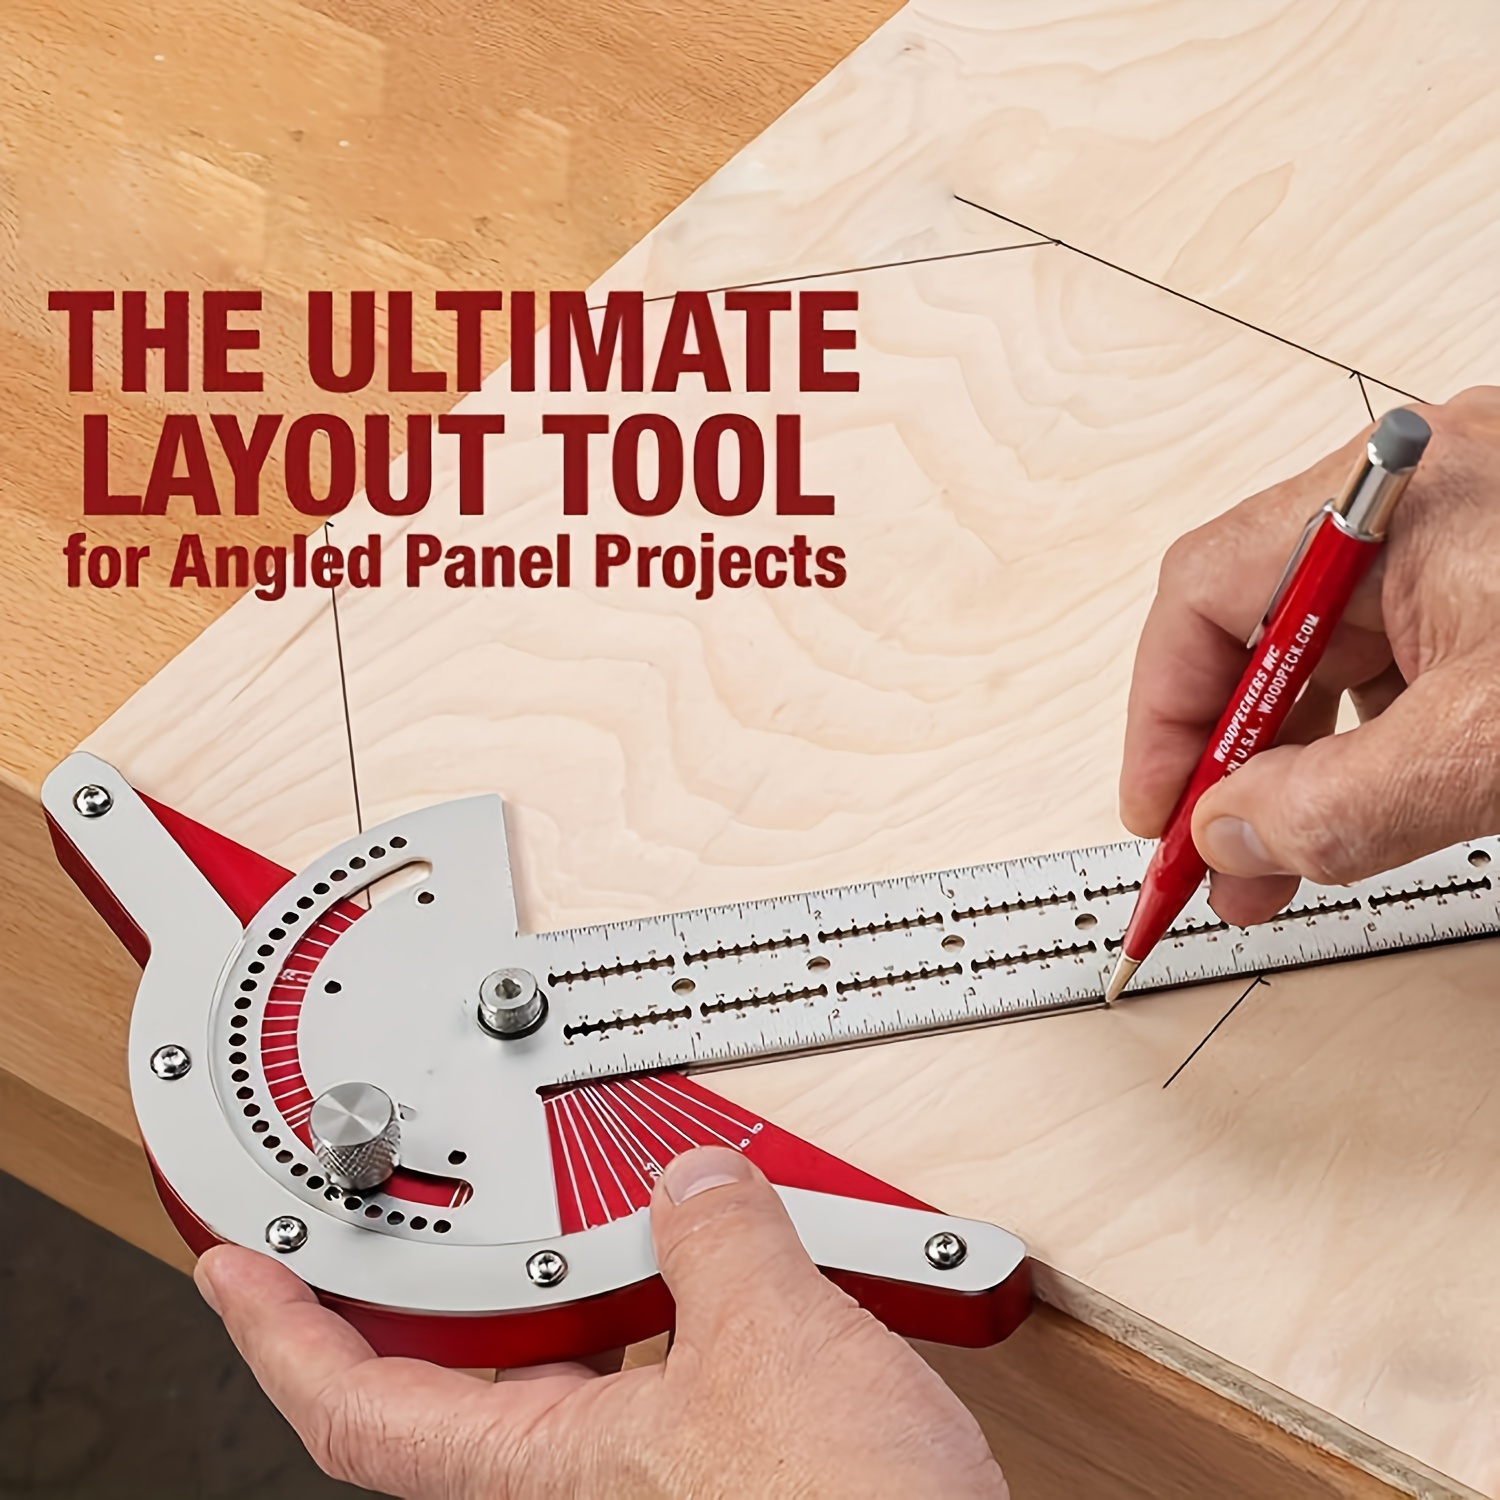 Best Woodworking Measuring Tools and Marking Tools - An Ultimate Guide